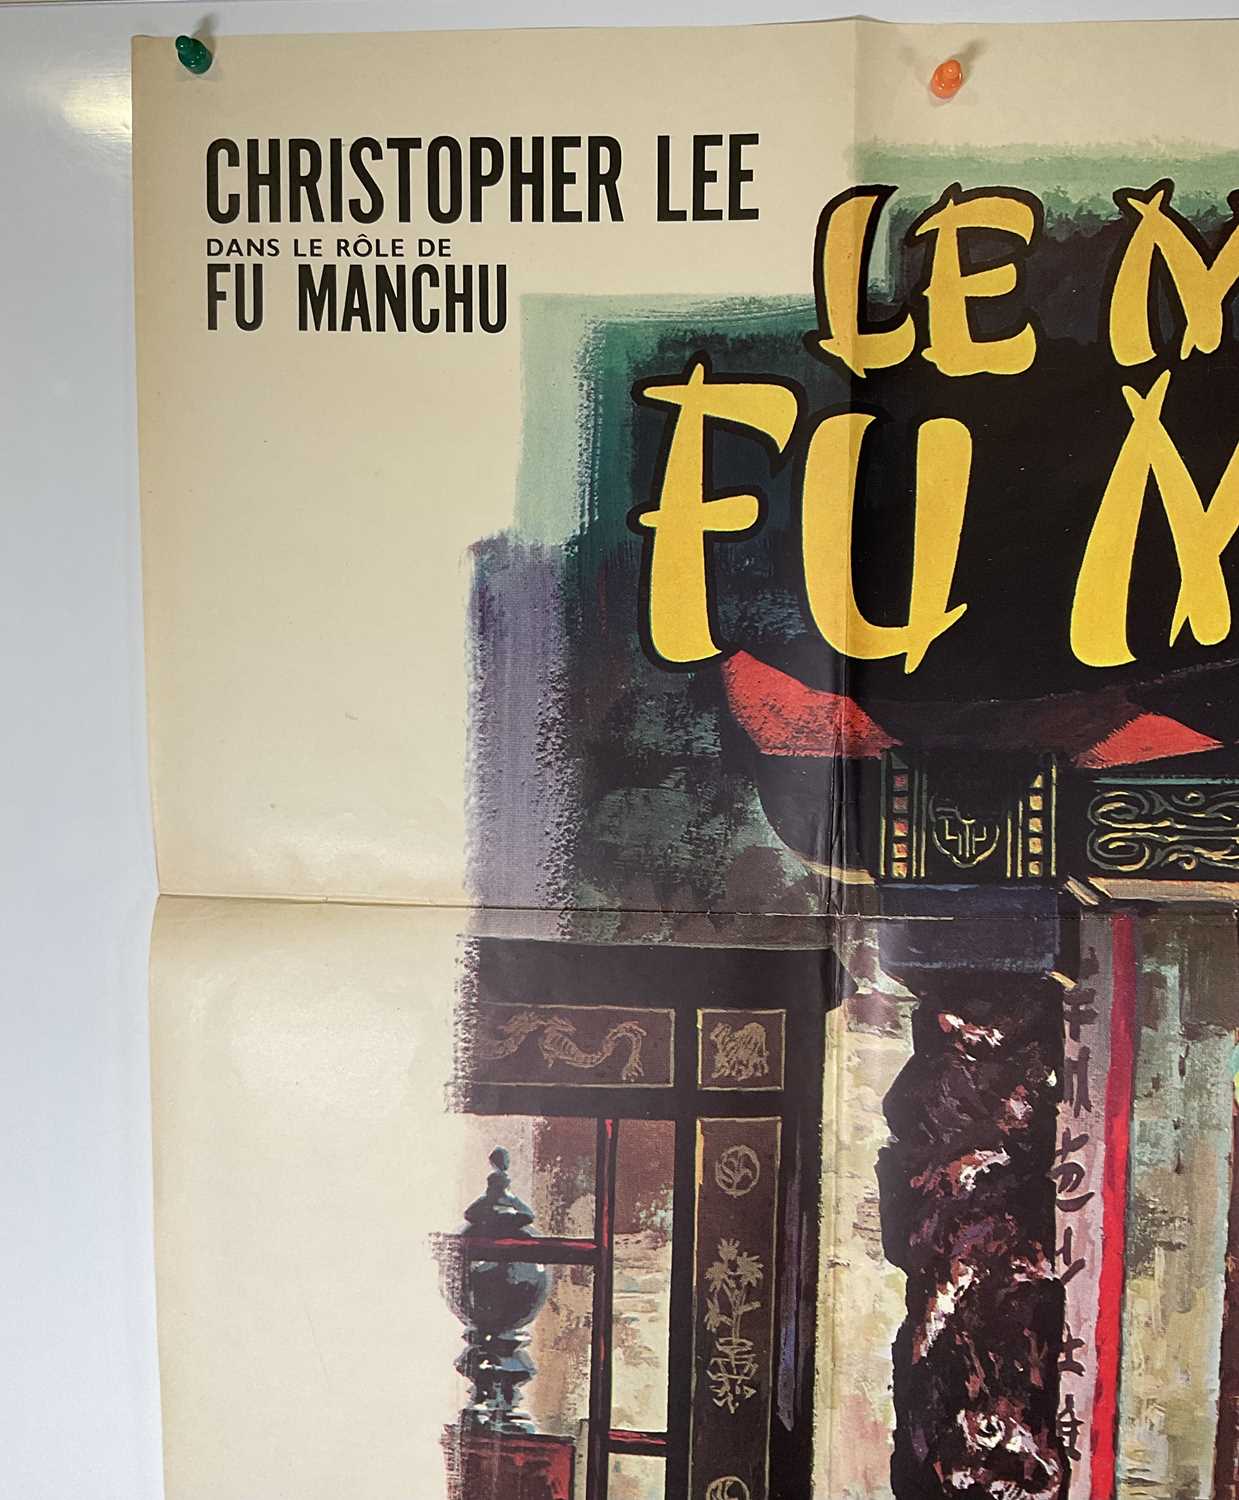 THE FACE OF FU MANCHU (1966) French Grande, one panel film poster starring Christopher Lee, - Image 5 of 5